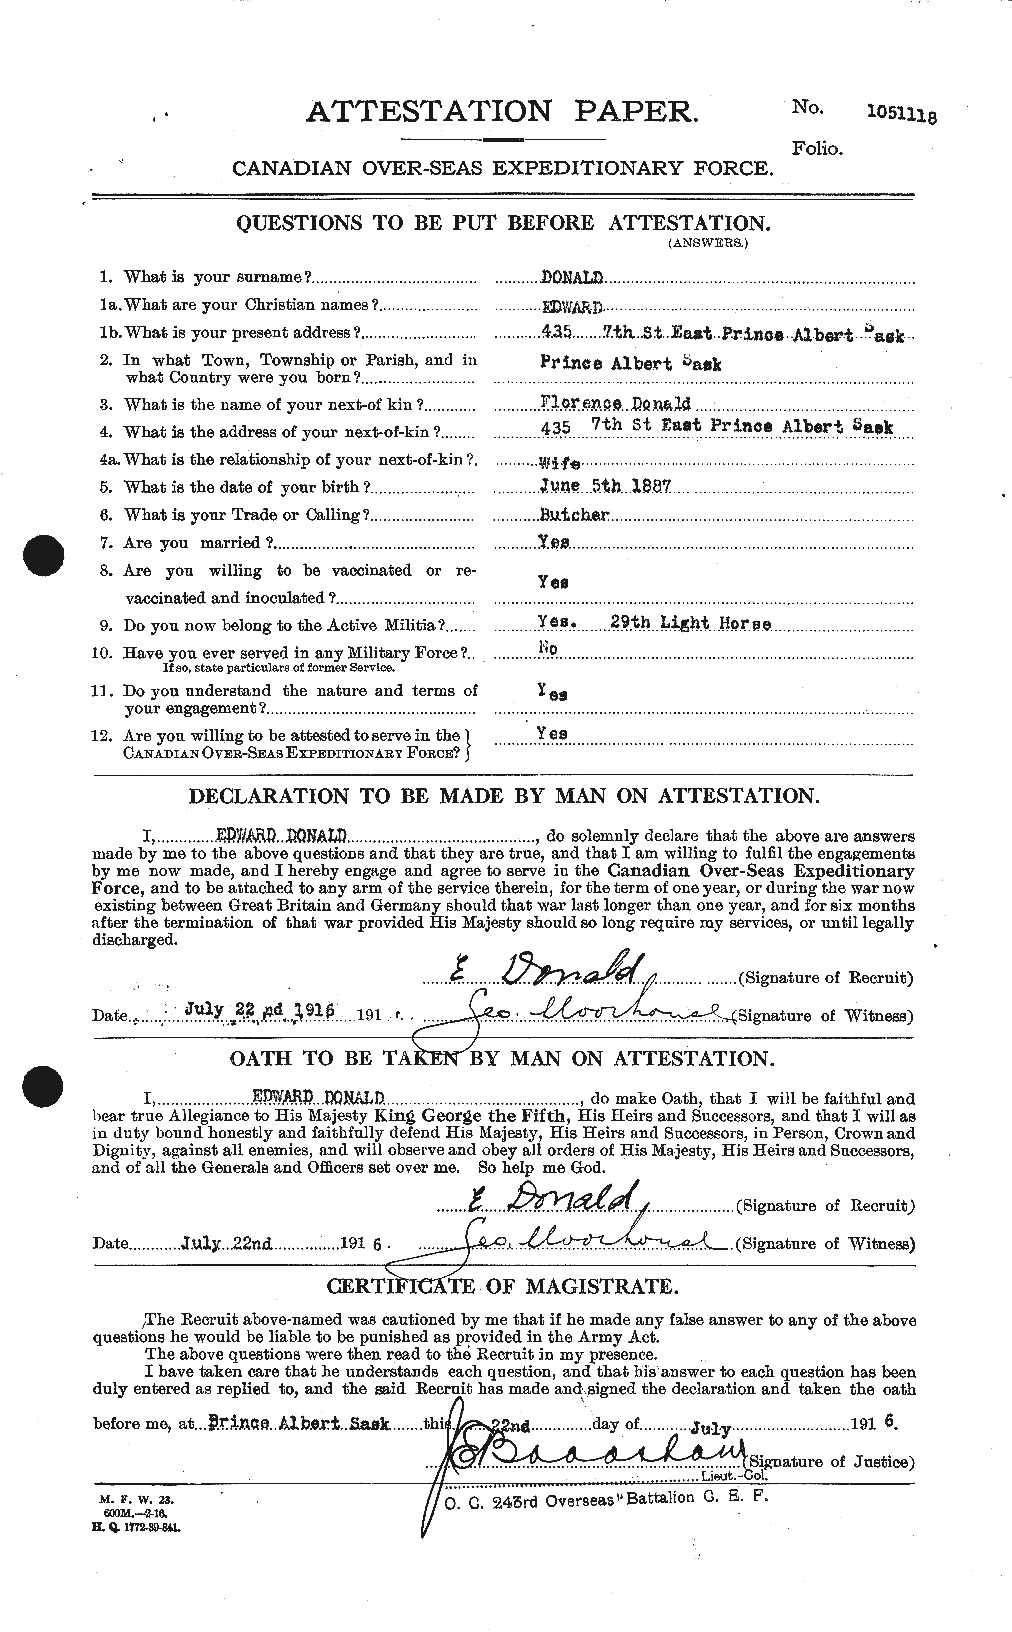 Personnel Records of the First World War - CEF 295726a